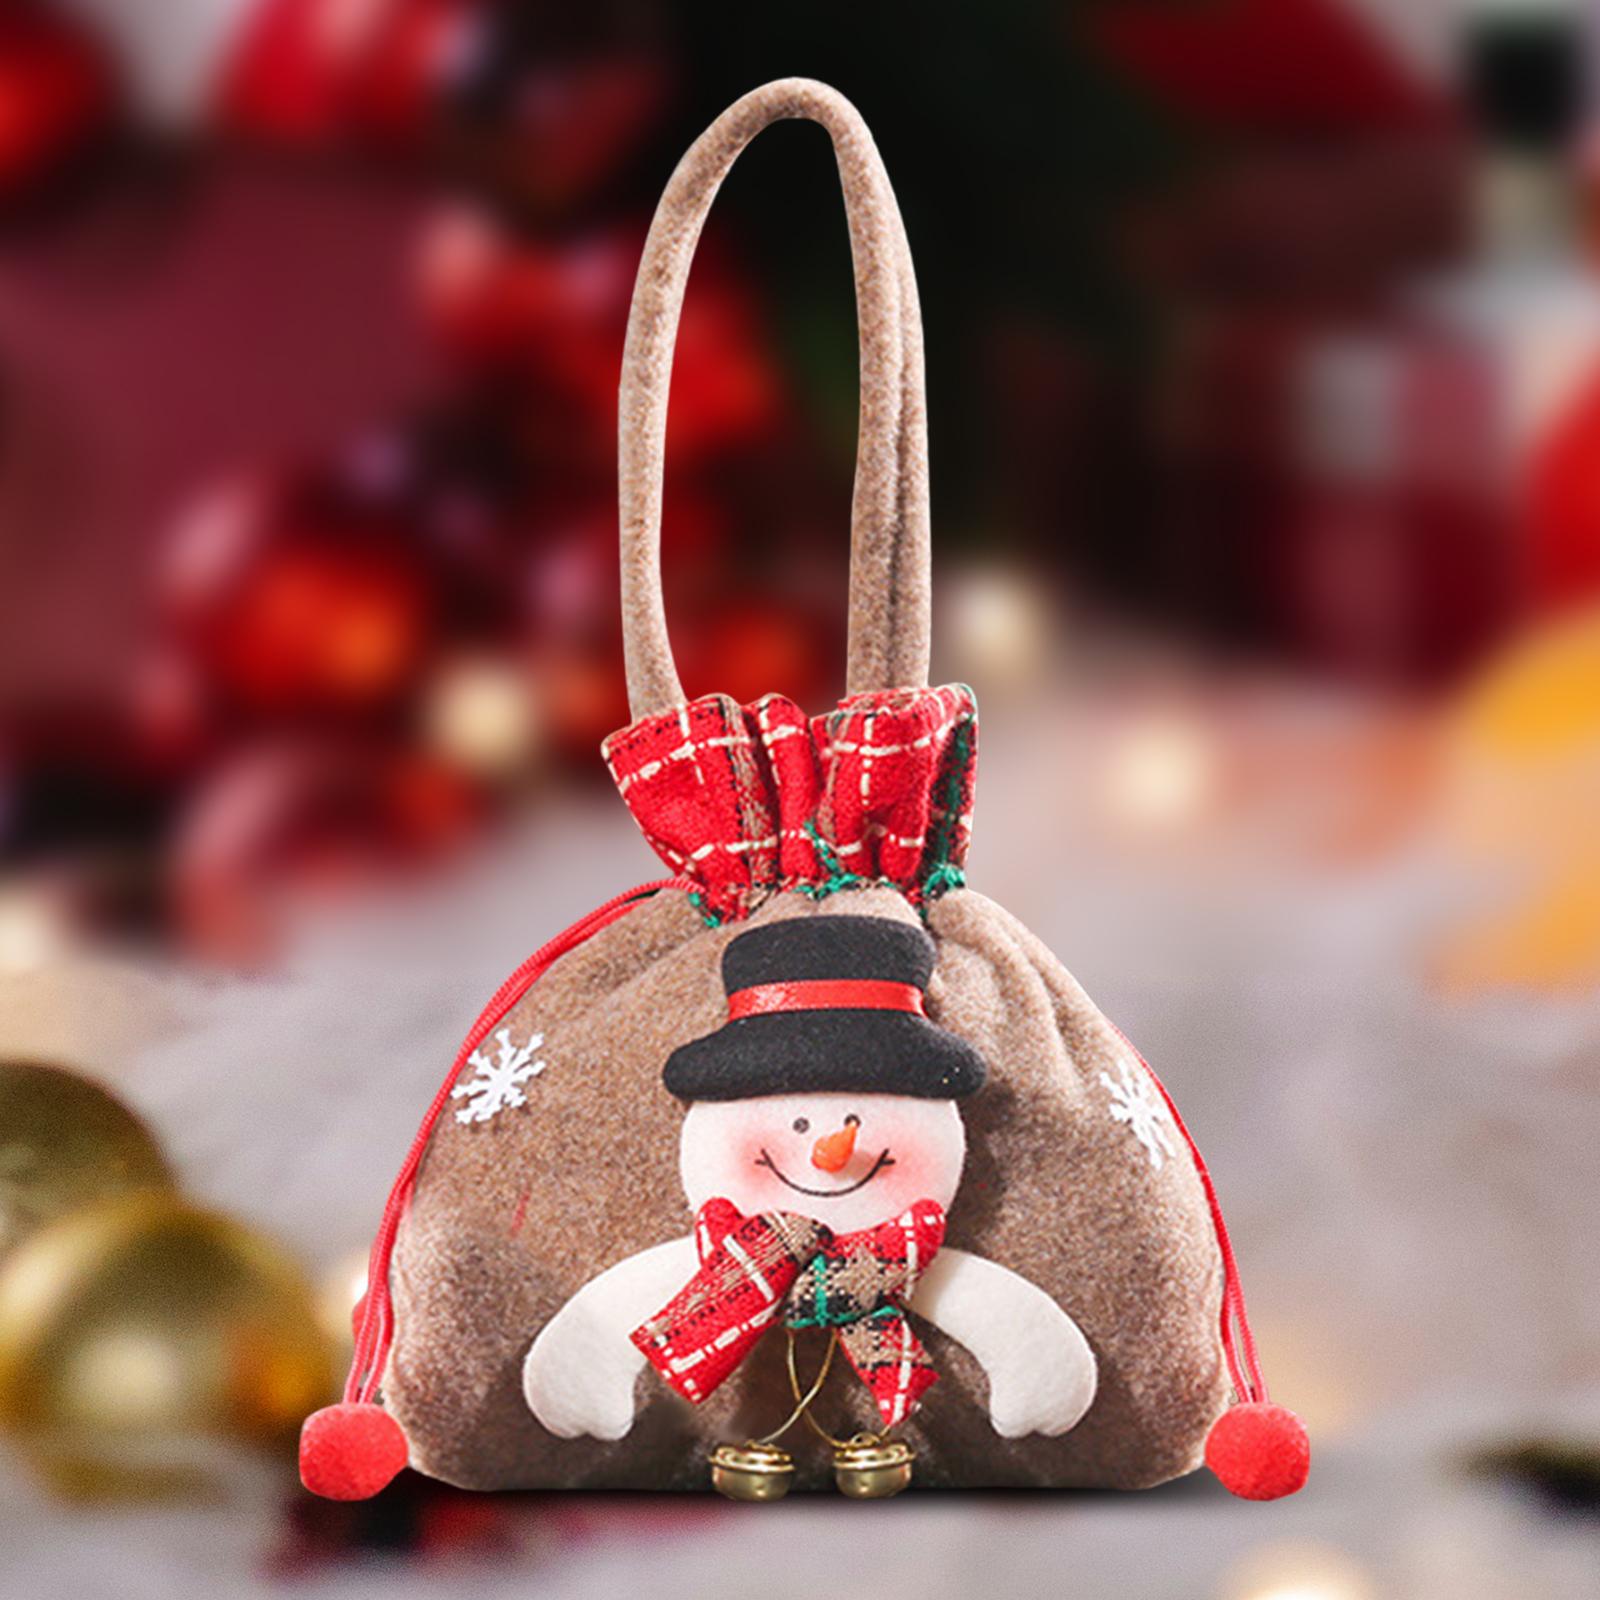 Christmas Candy Bags Drawstring Bags Decoration Party Supplies Xmas Eve Gift snowman